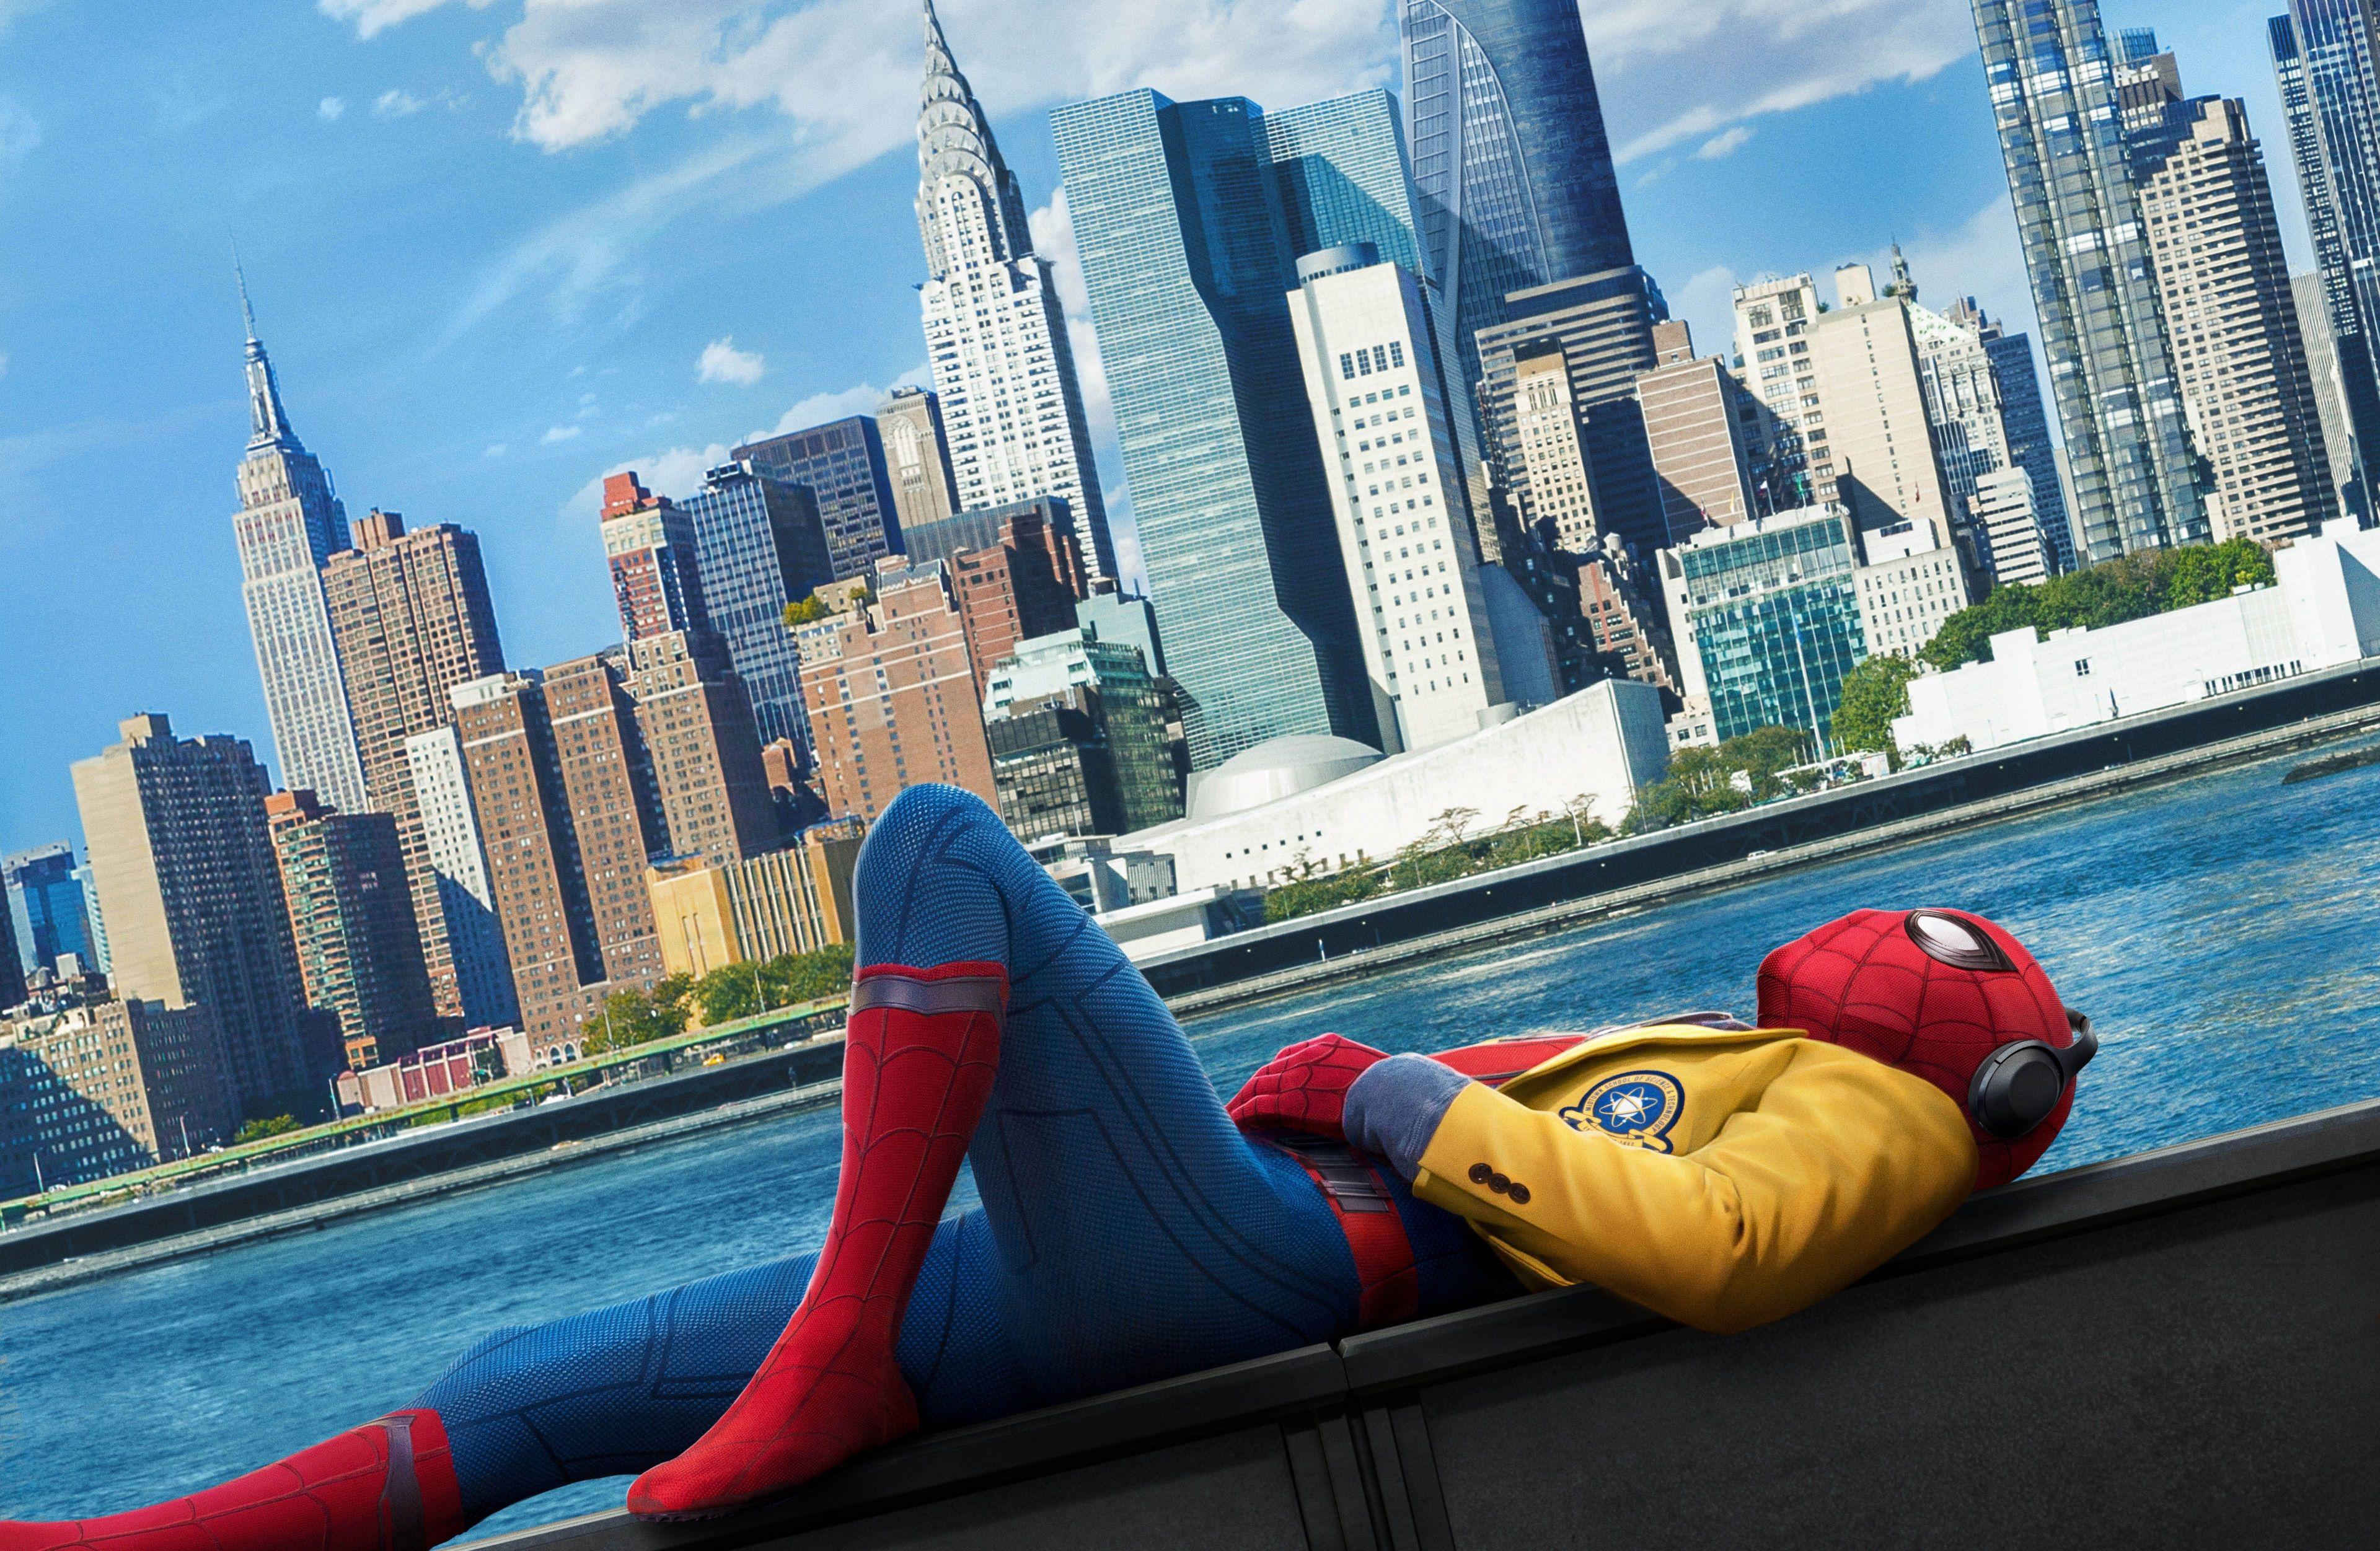 Spider Man Homecoming Computer Wallpapers Top Free Spider Man